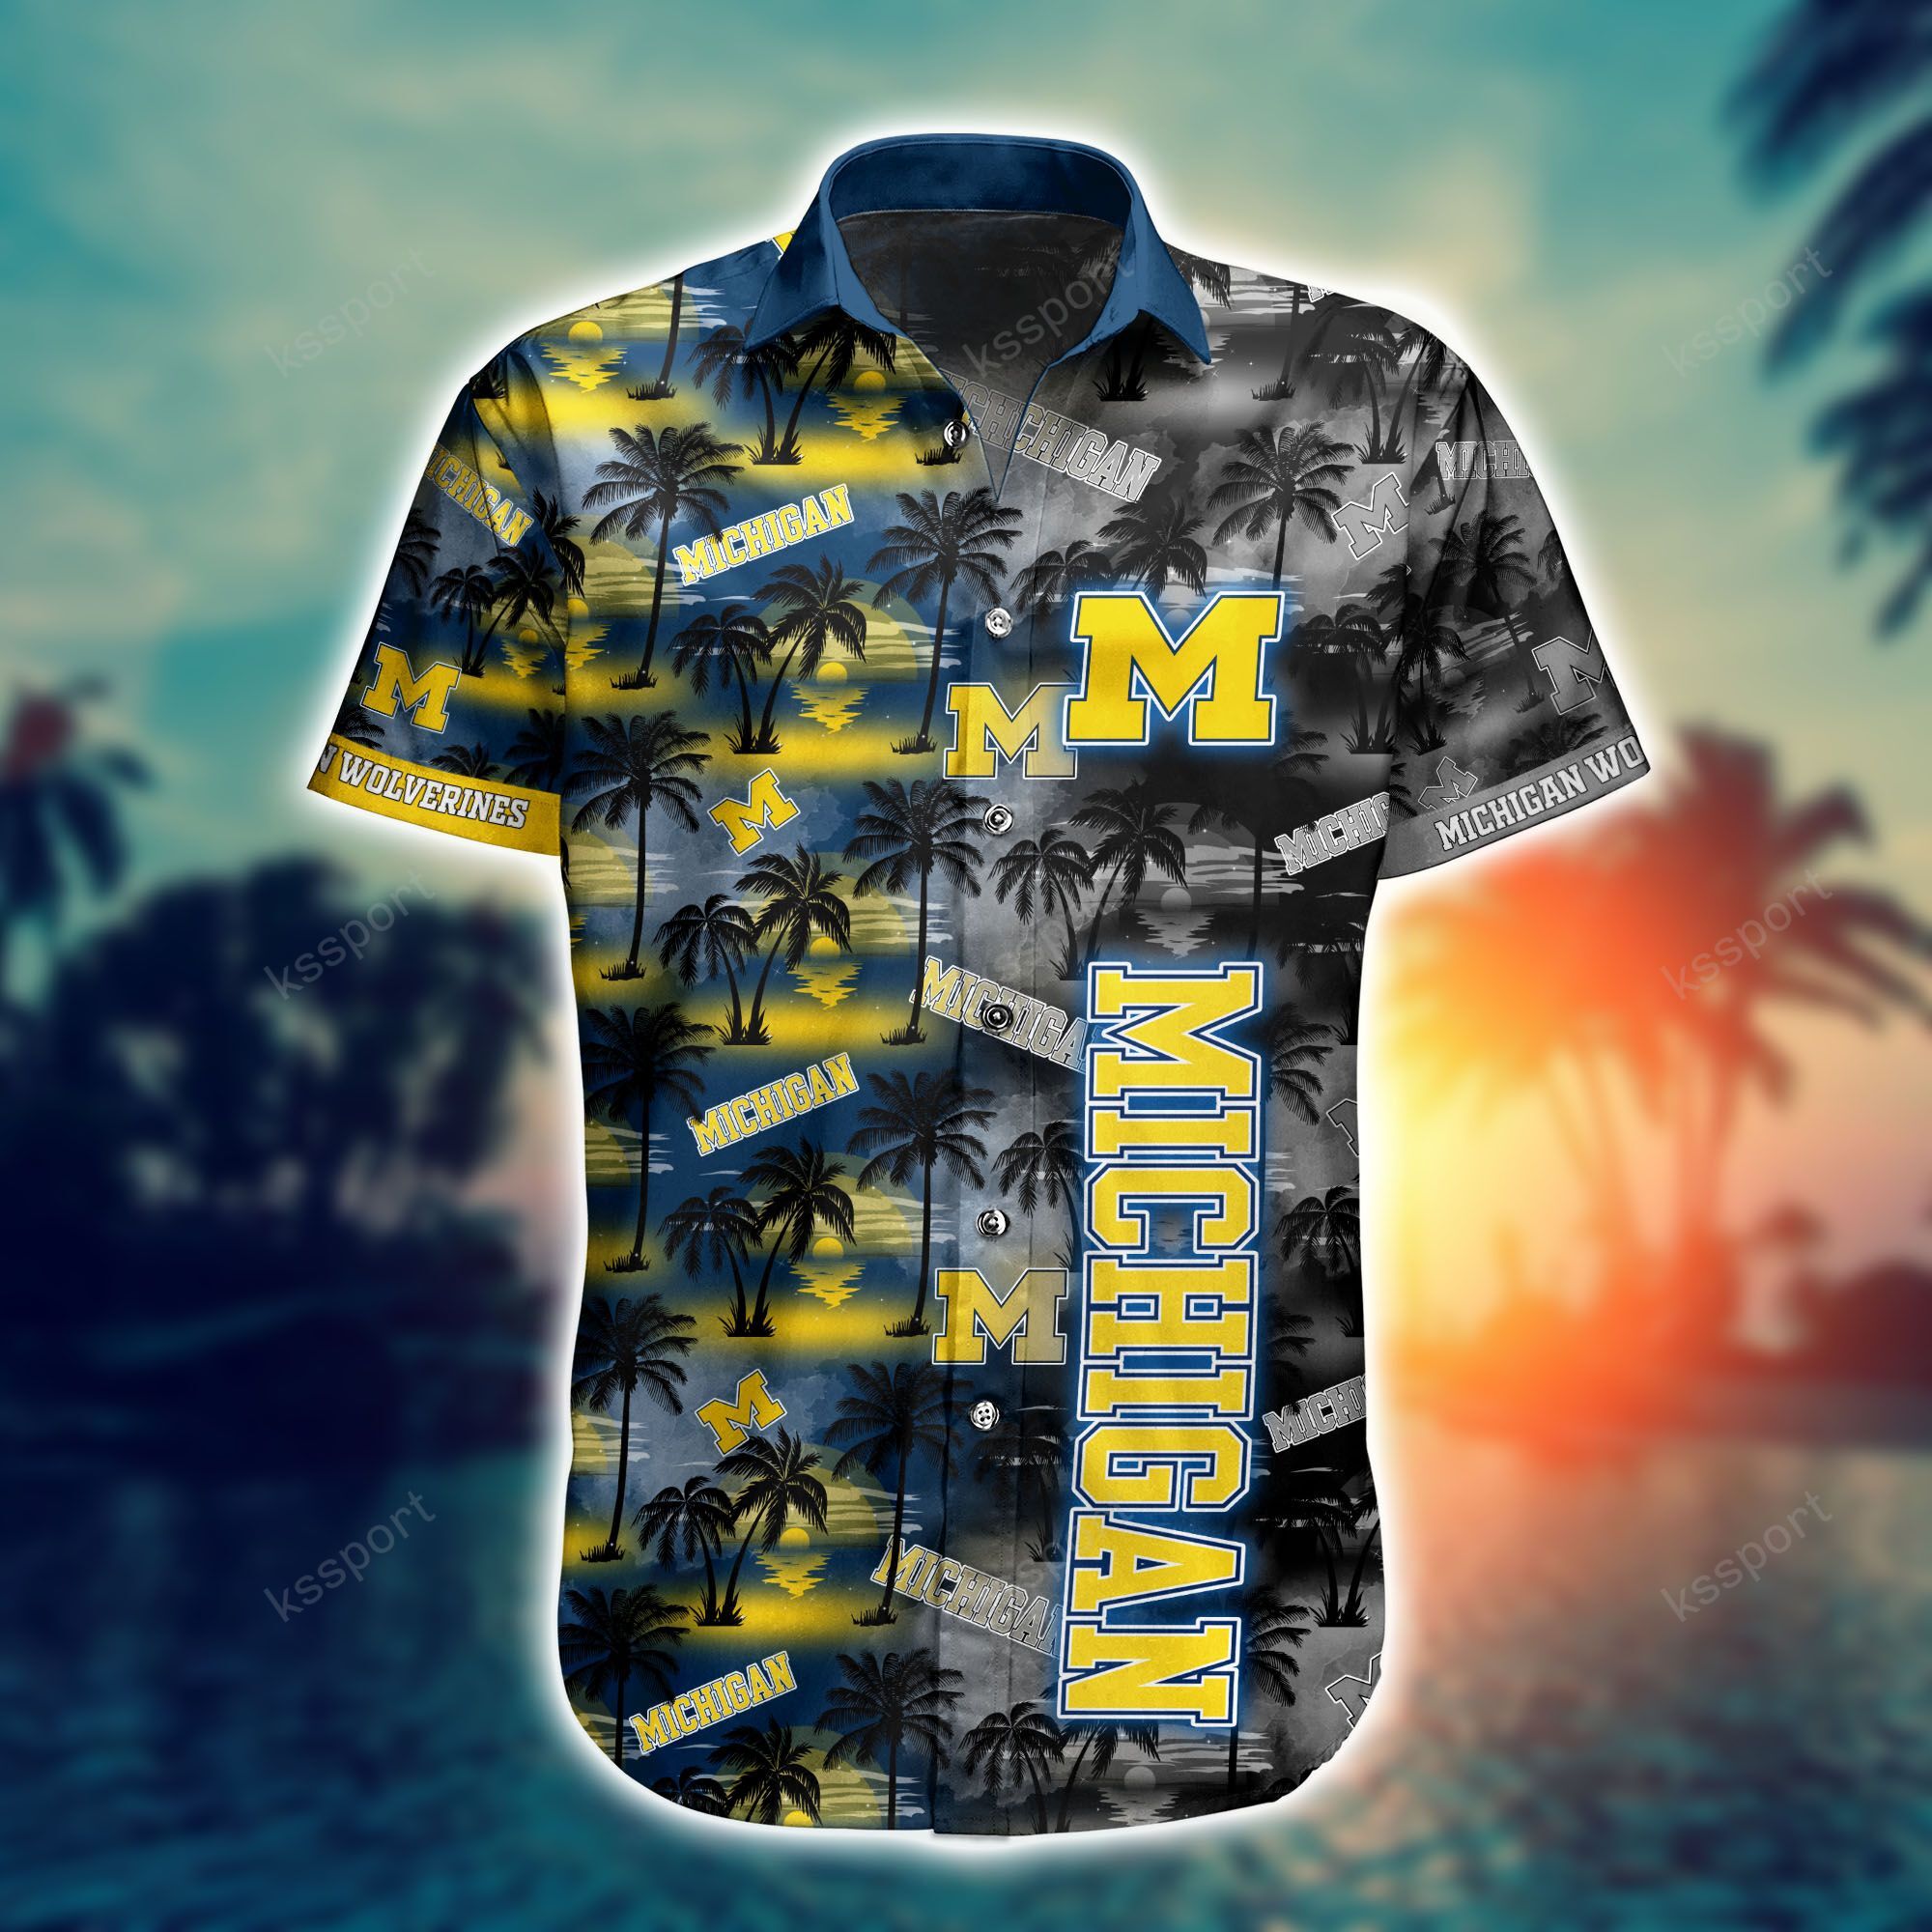 Top cool Hawaiian shirt 2022 - Make sure you get yours today before they run out! 150